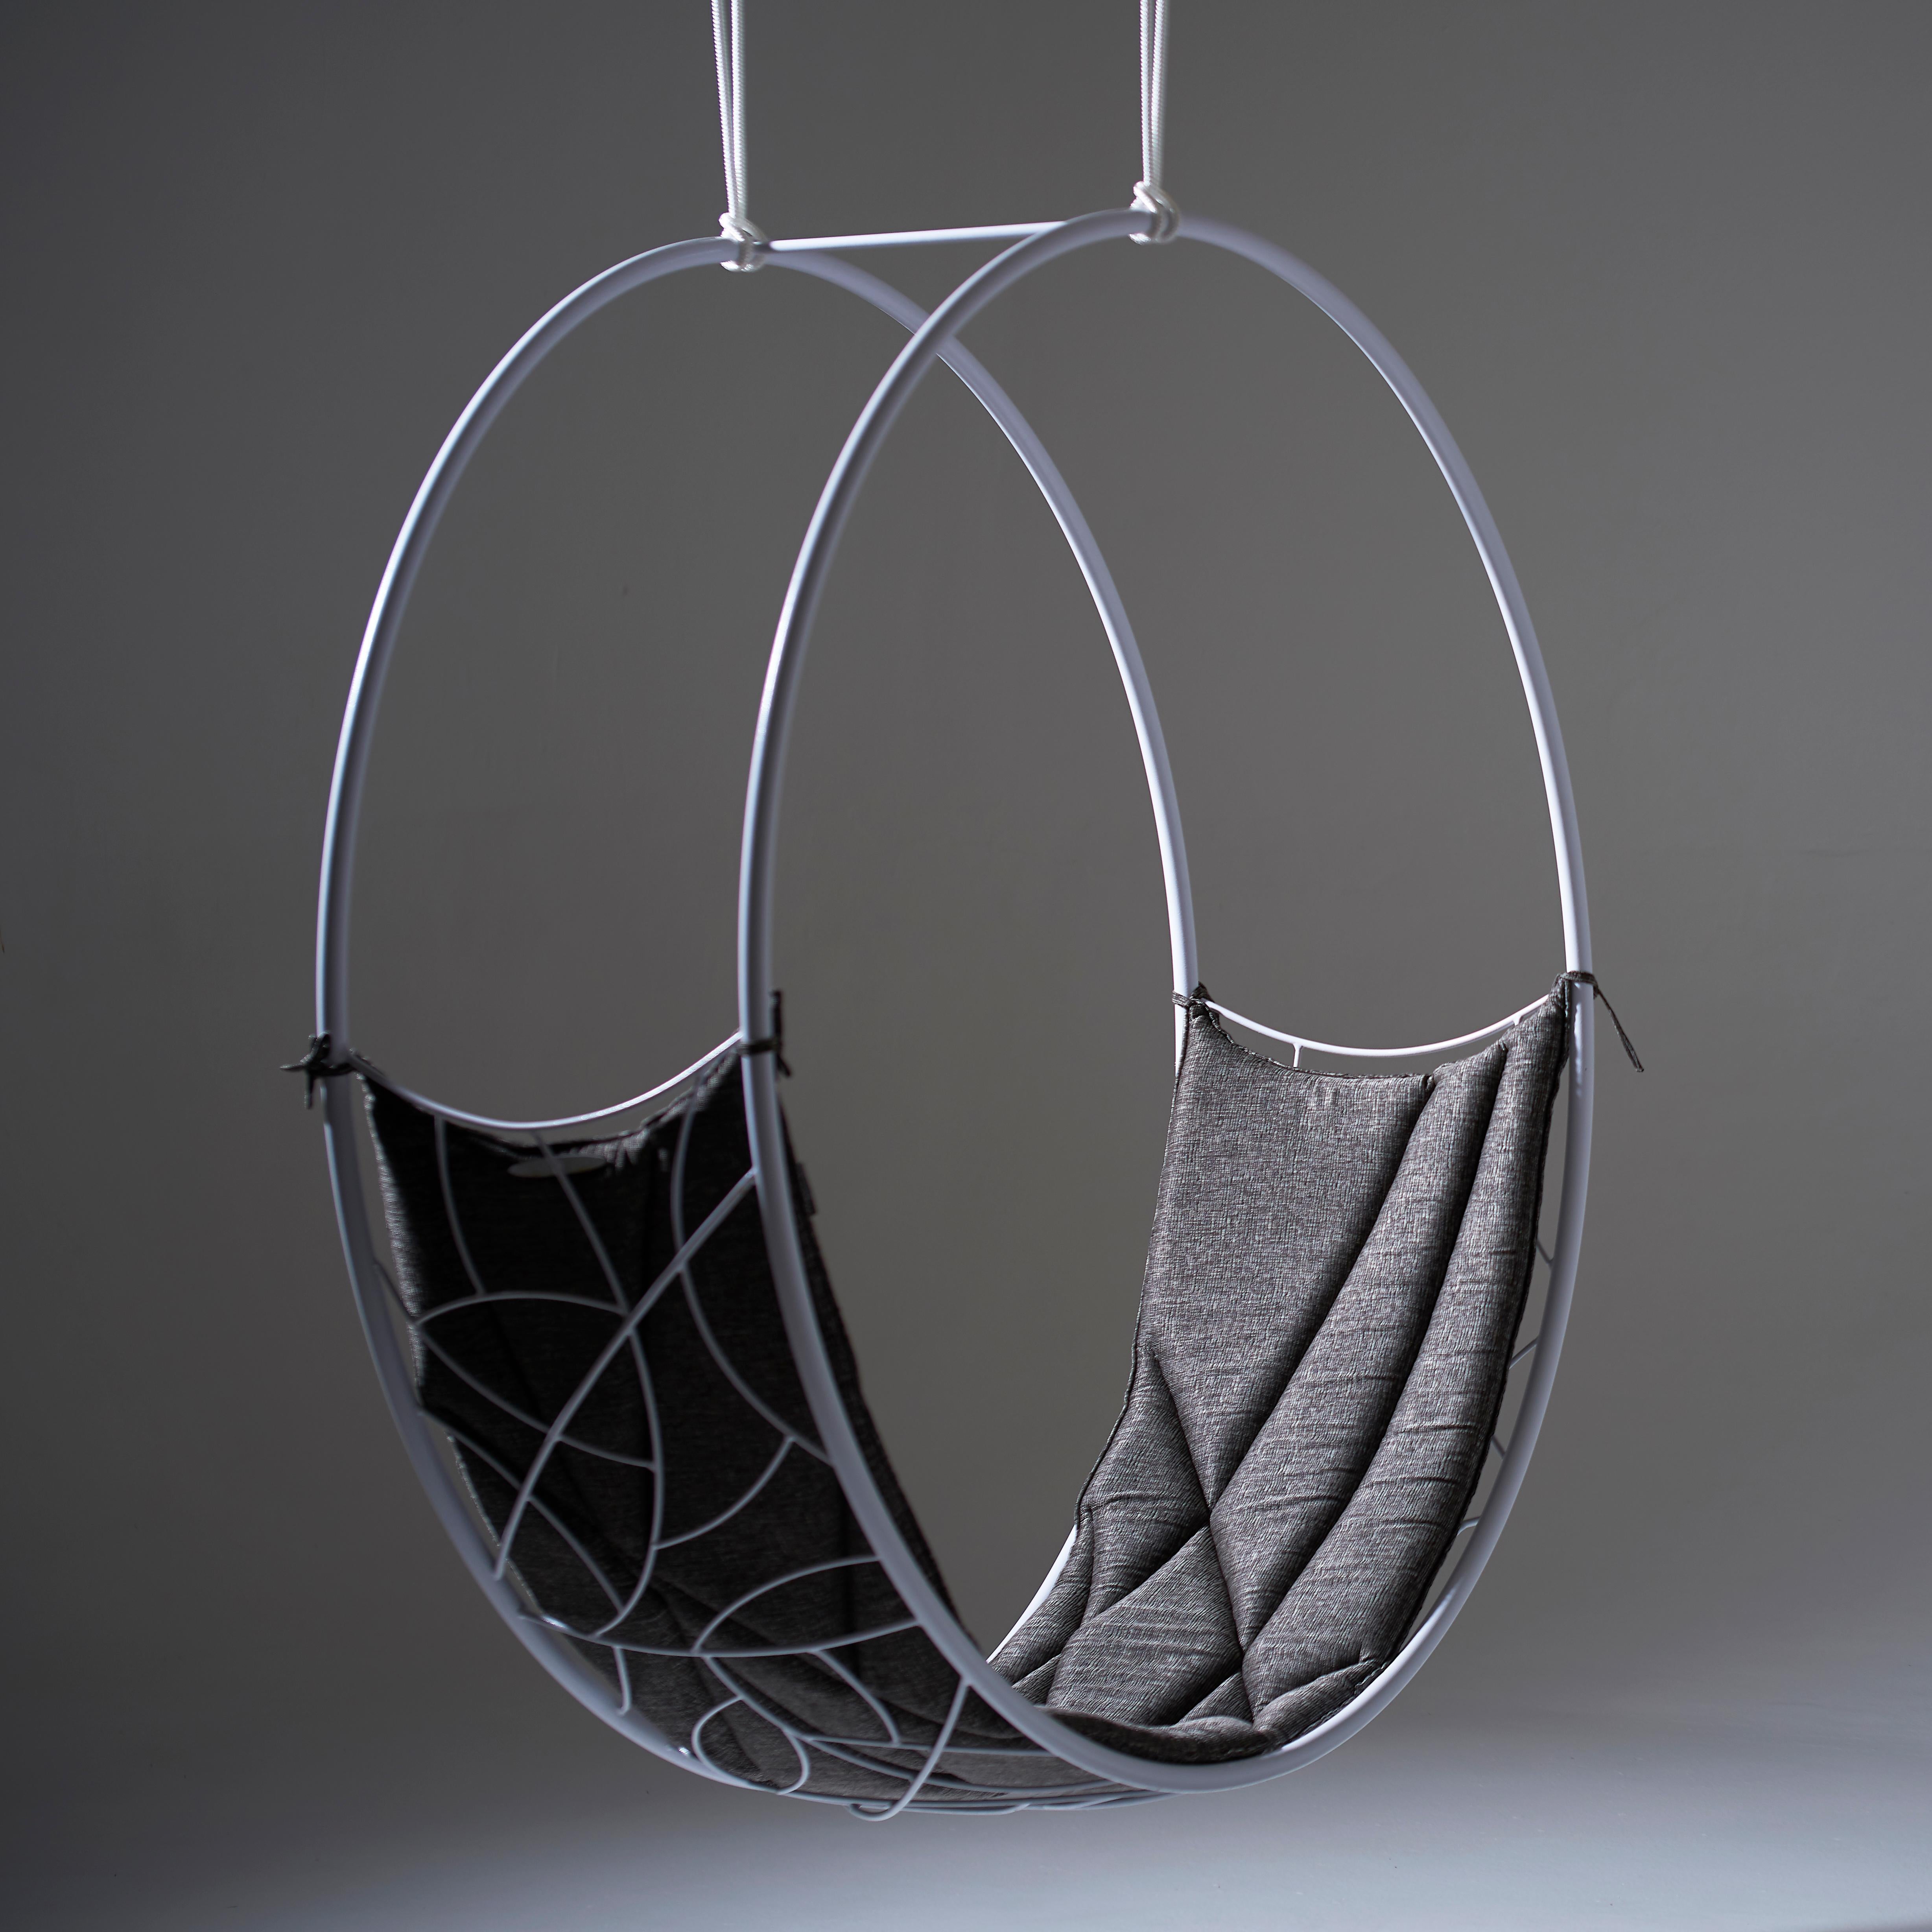 The Wheel hanging chair swing seat is sculptural and dynamic. Its striking circular shape lends itself for use as a functional art piece.

The chair has an open yet enveloping feel. The pattern detail is inspired by nature and reminiscent of the